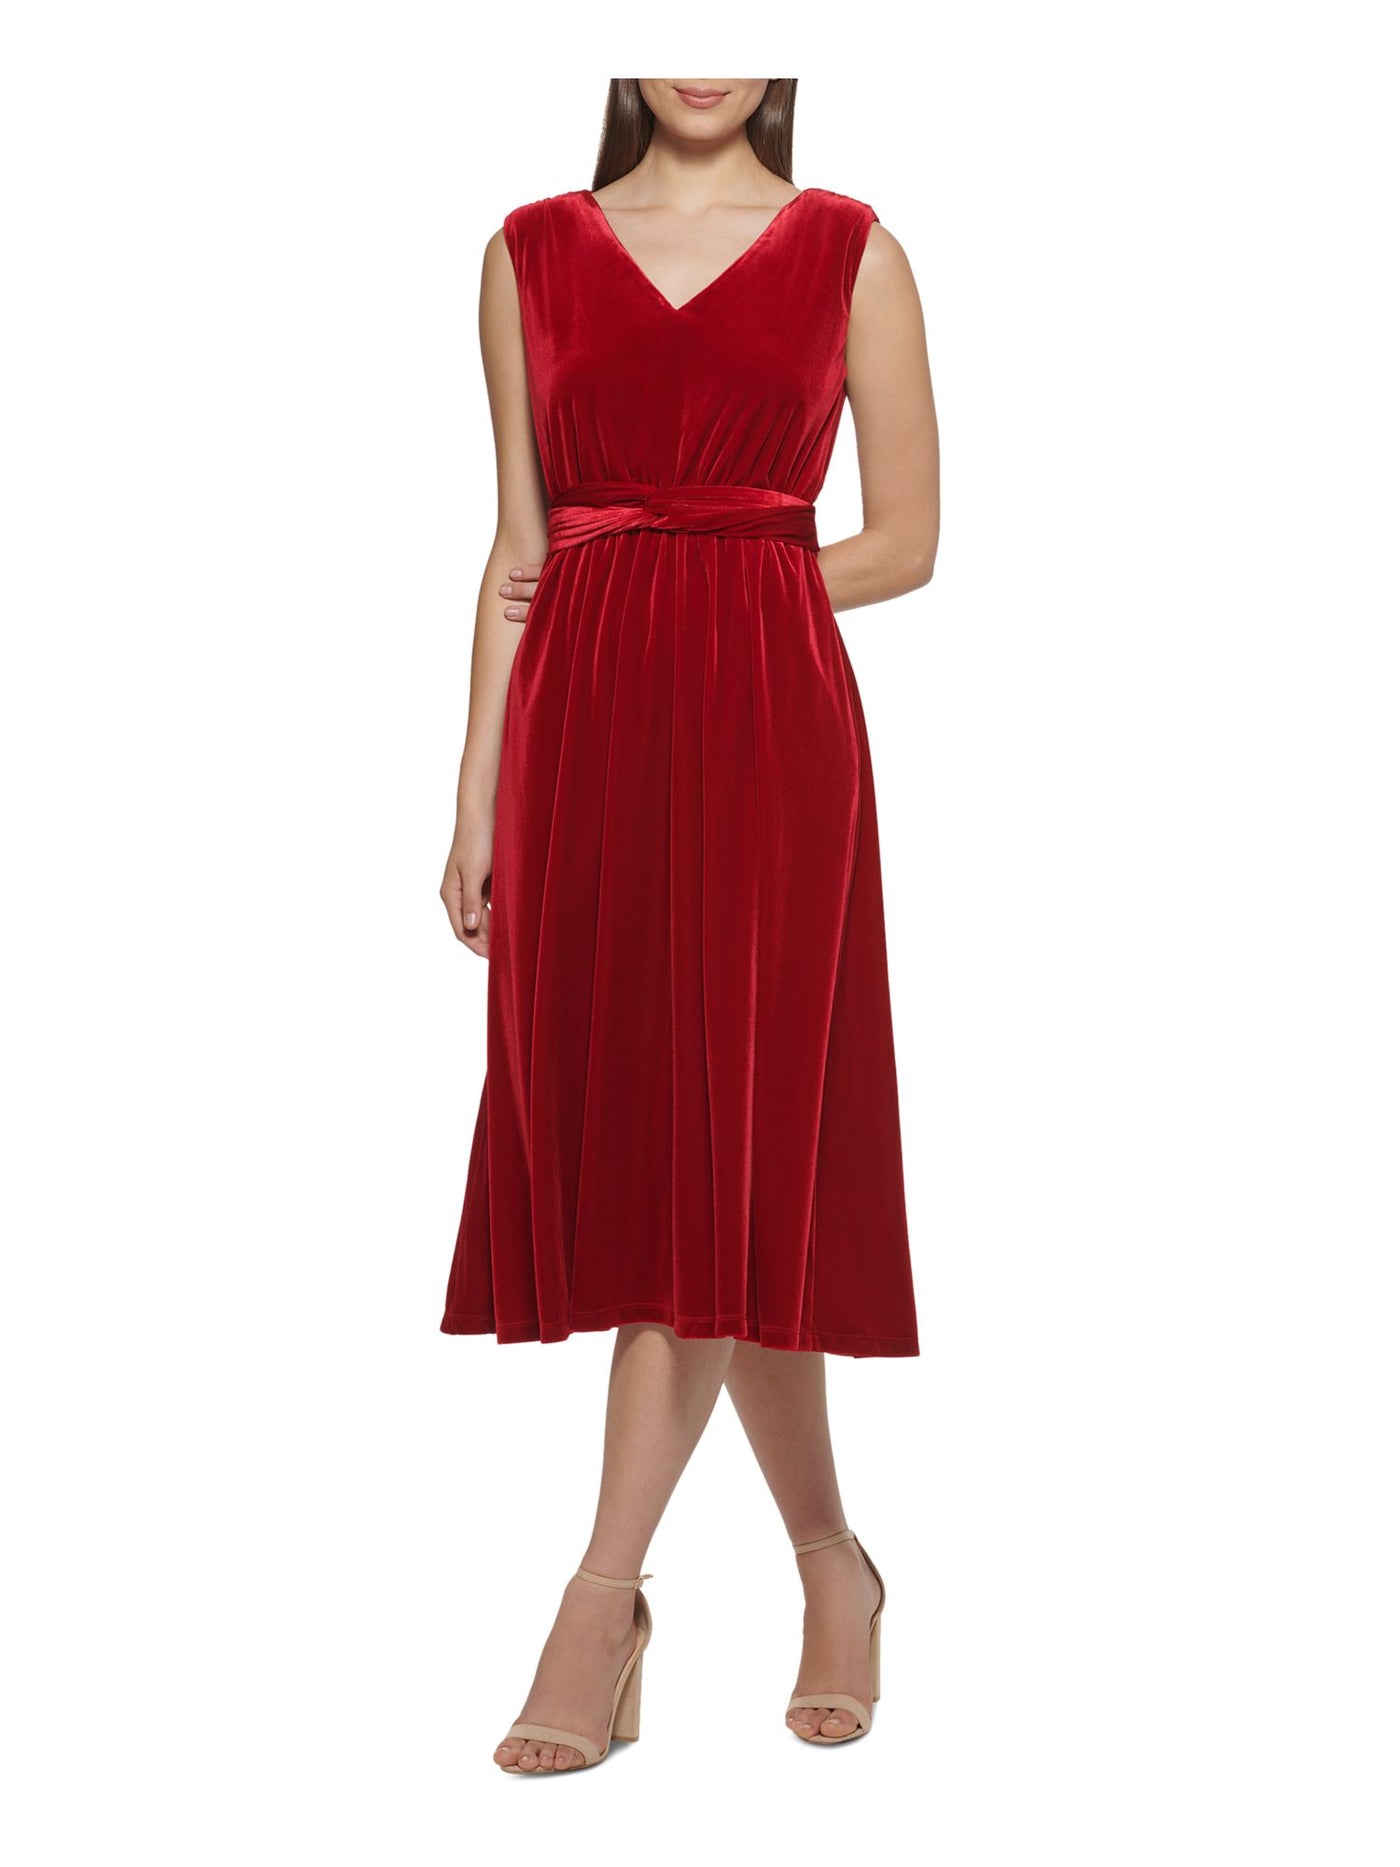 KENSIE Womens Red Pocketed Twist Front Sleeveless V Neck Midi Party Shift Dress S